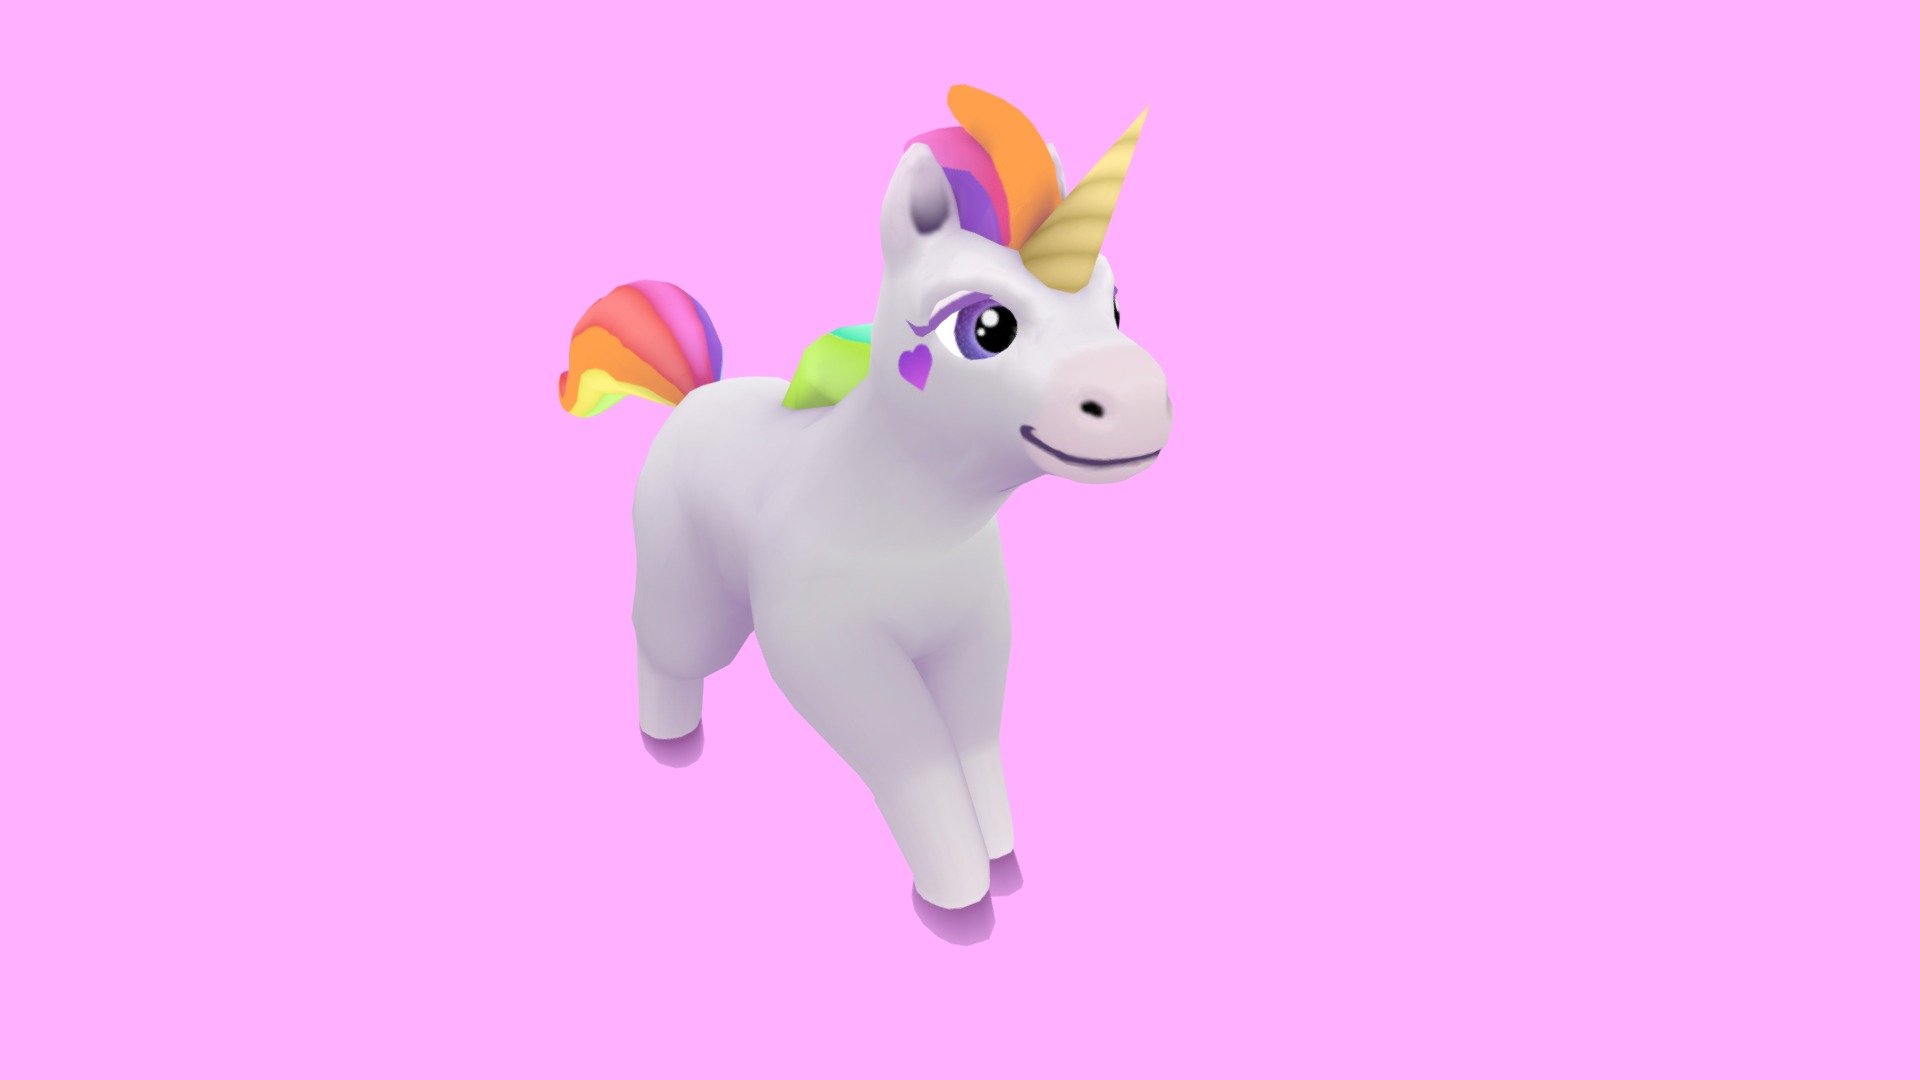 super ultra cute unicorn character optimized for mobiles, handpainted textured, rigged and animated with a simple run animation - Super Cute Unicorn uwu - 3D model by La Cabra Games (@lacabragames) 3d model